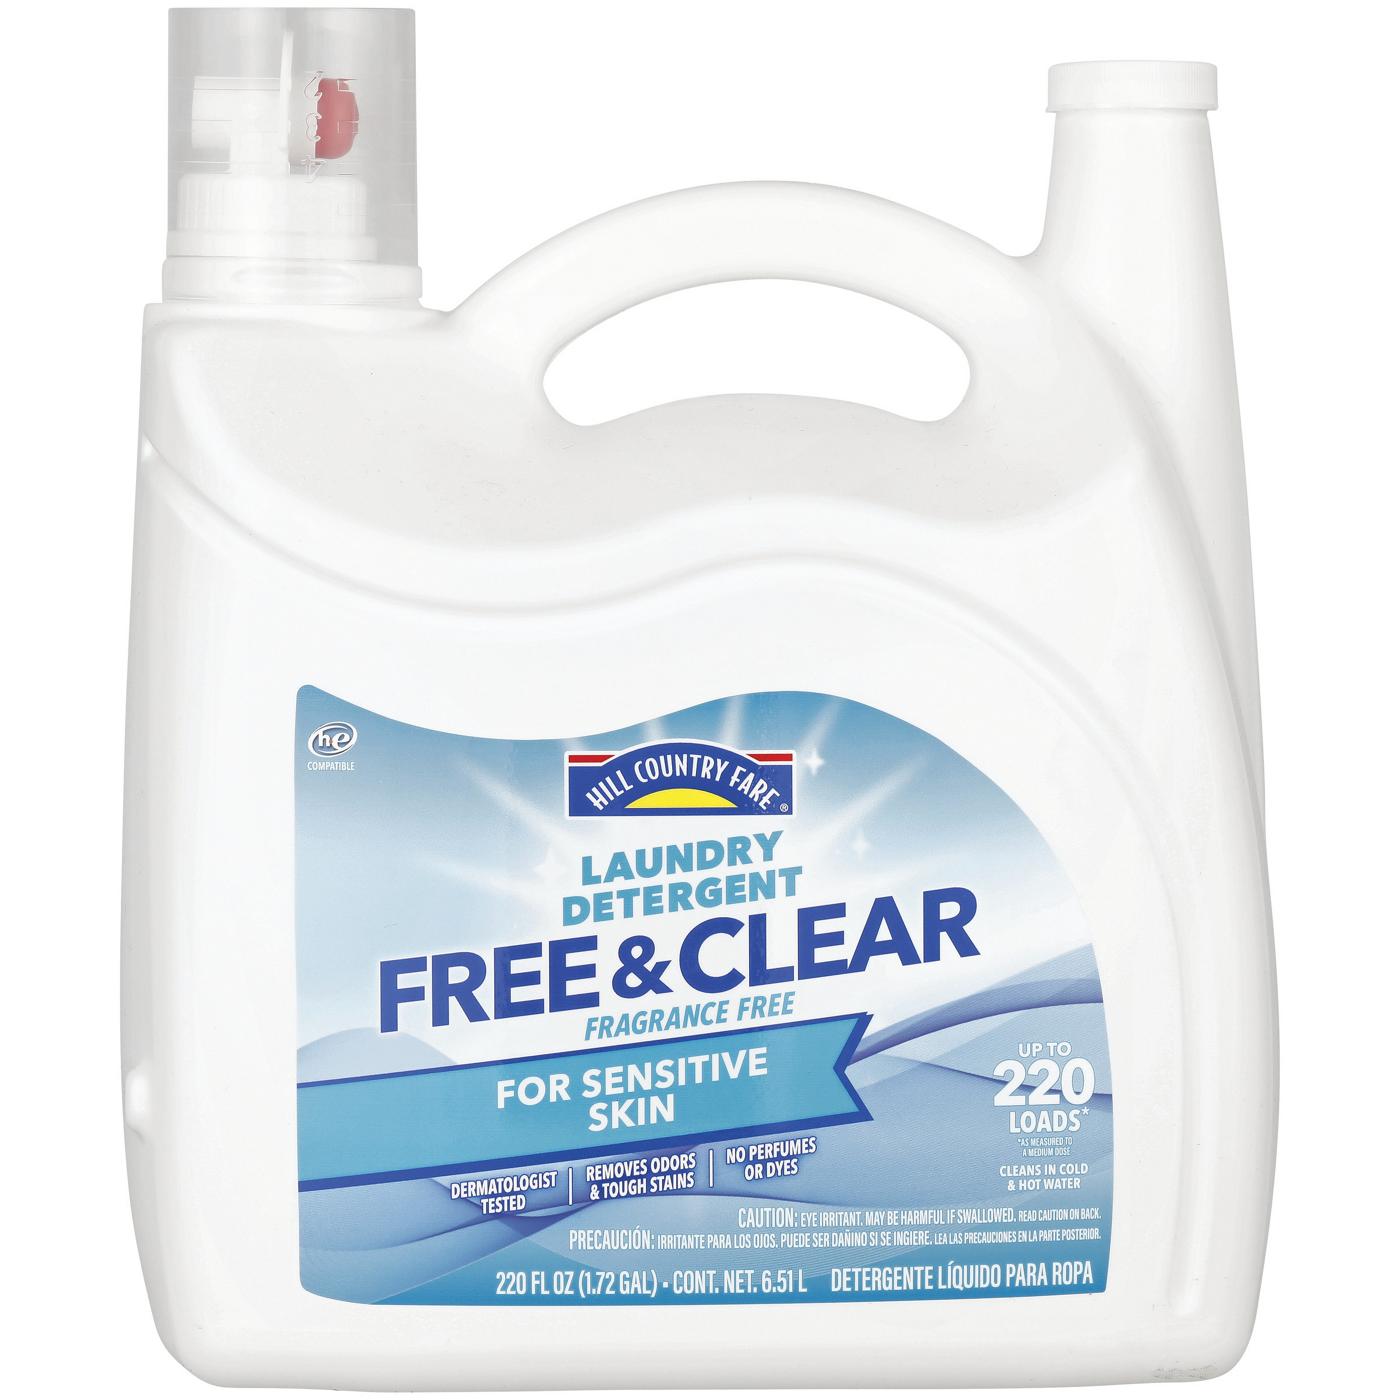 Hill Country Fare Free & Clear HE Liquid Laundry Detergent, 220 Loads – Fragrance-Free; image 1 of 3